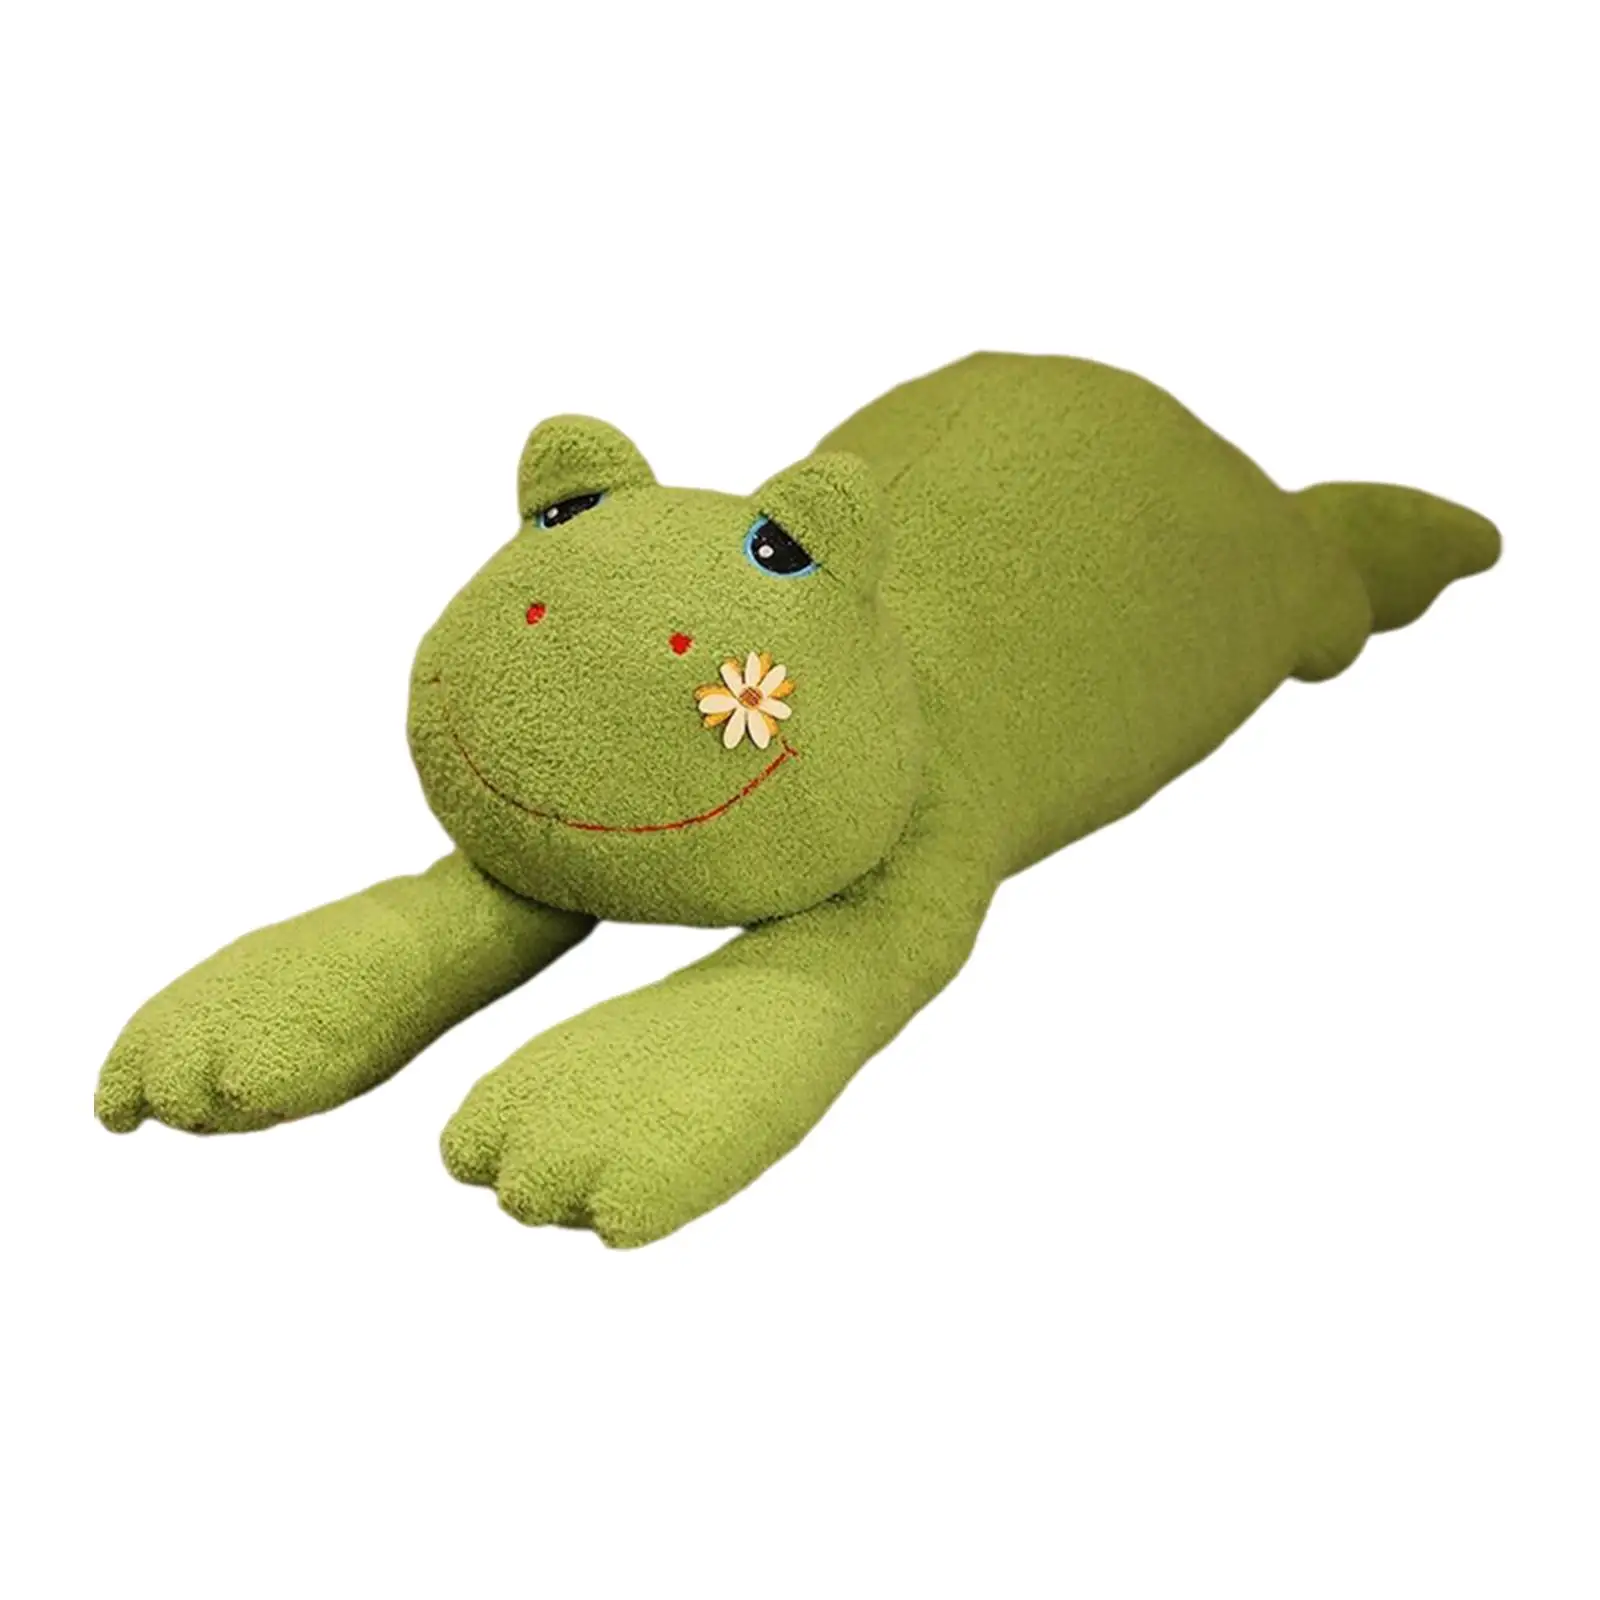 cuddly Frog Plush Doll pillow Adorable Stuffed Animal for Party Holiday Birthday Gifts Girlfriend Children